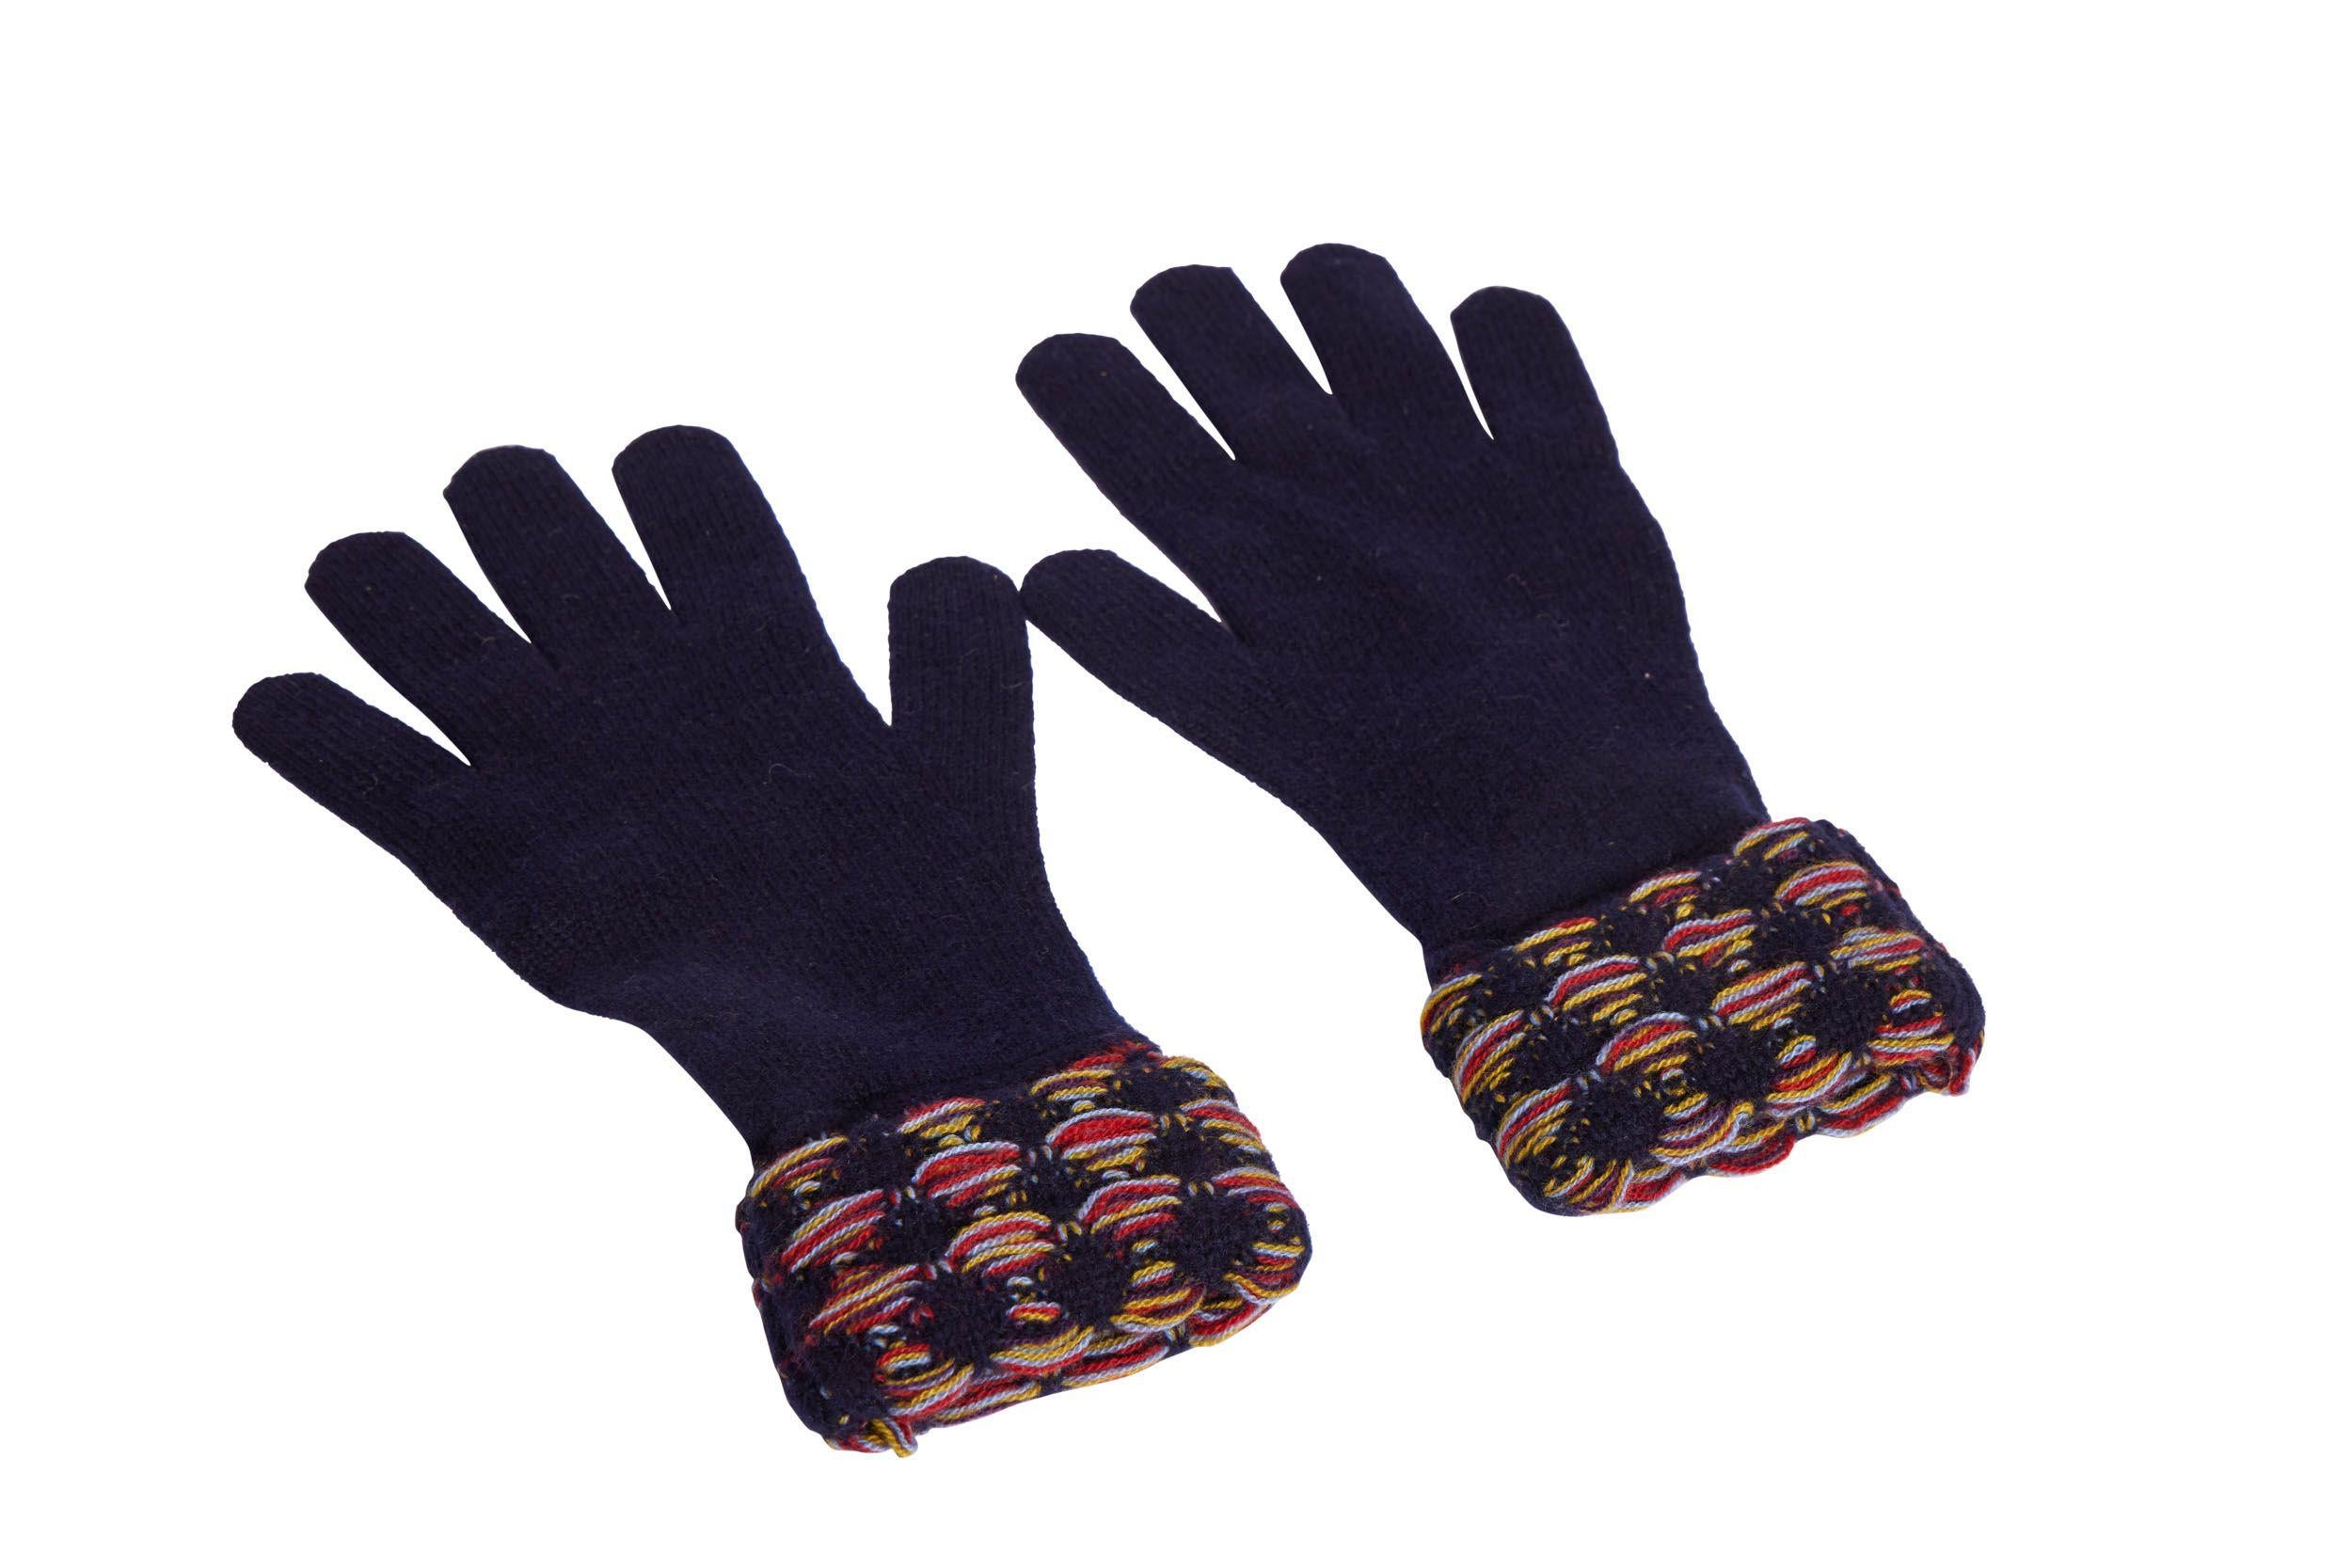 Chanel new cashmere navy gloves with tweed design multicolor cuff pattern. 70% cashmere, 30% silk.